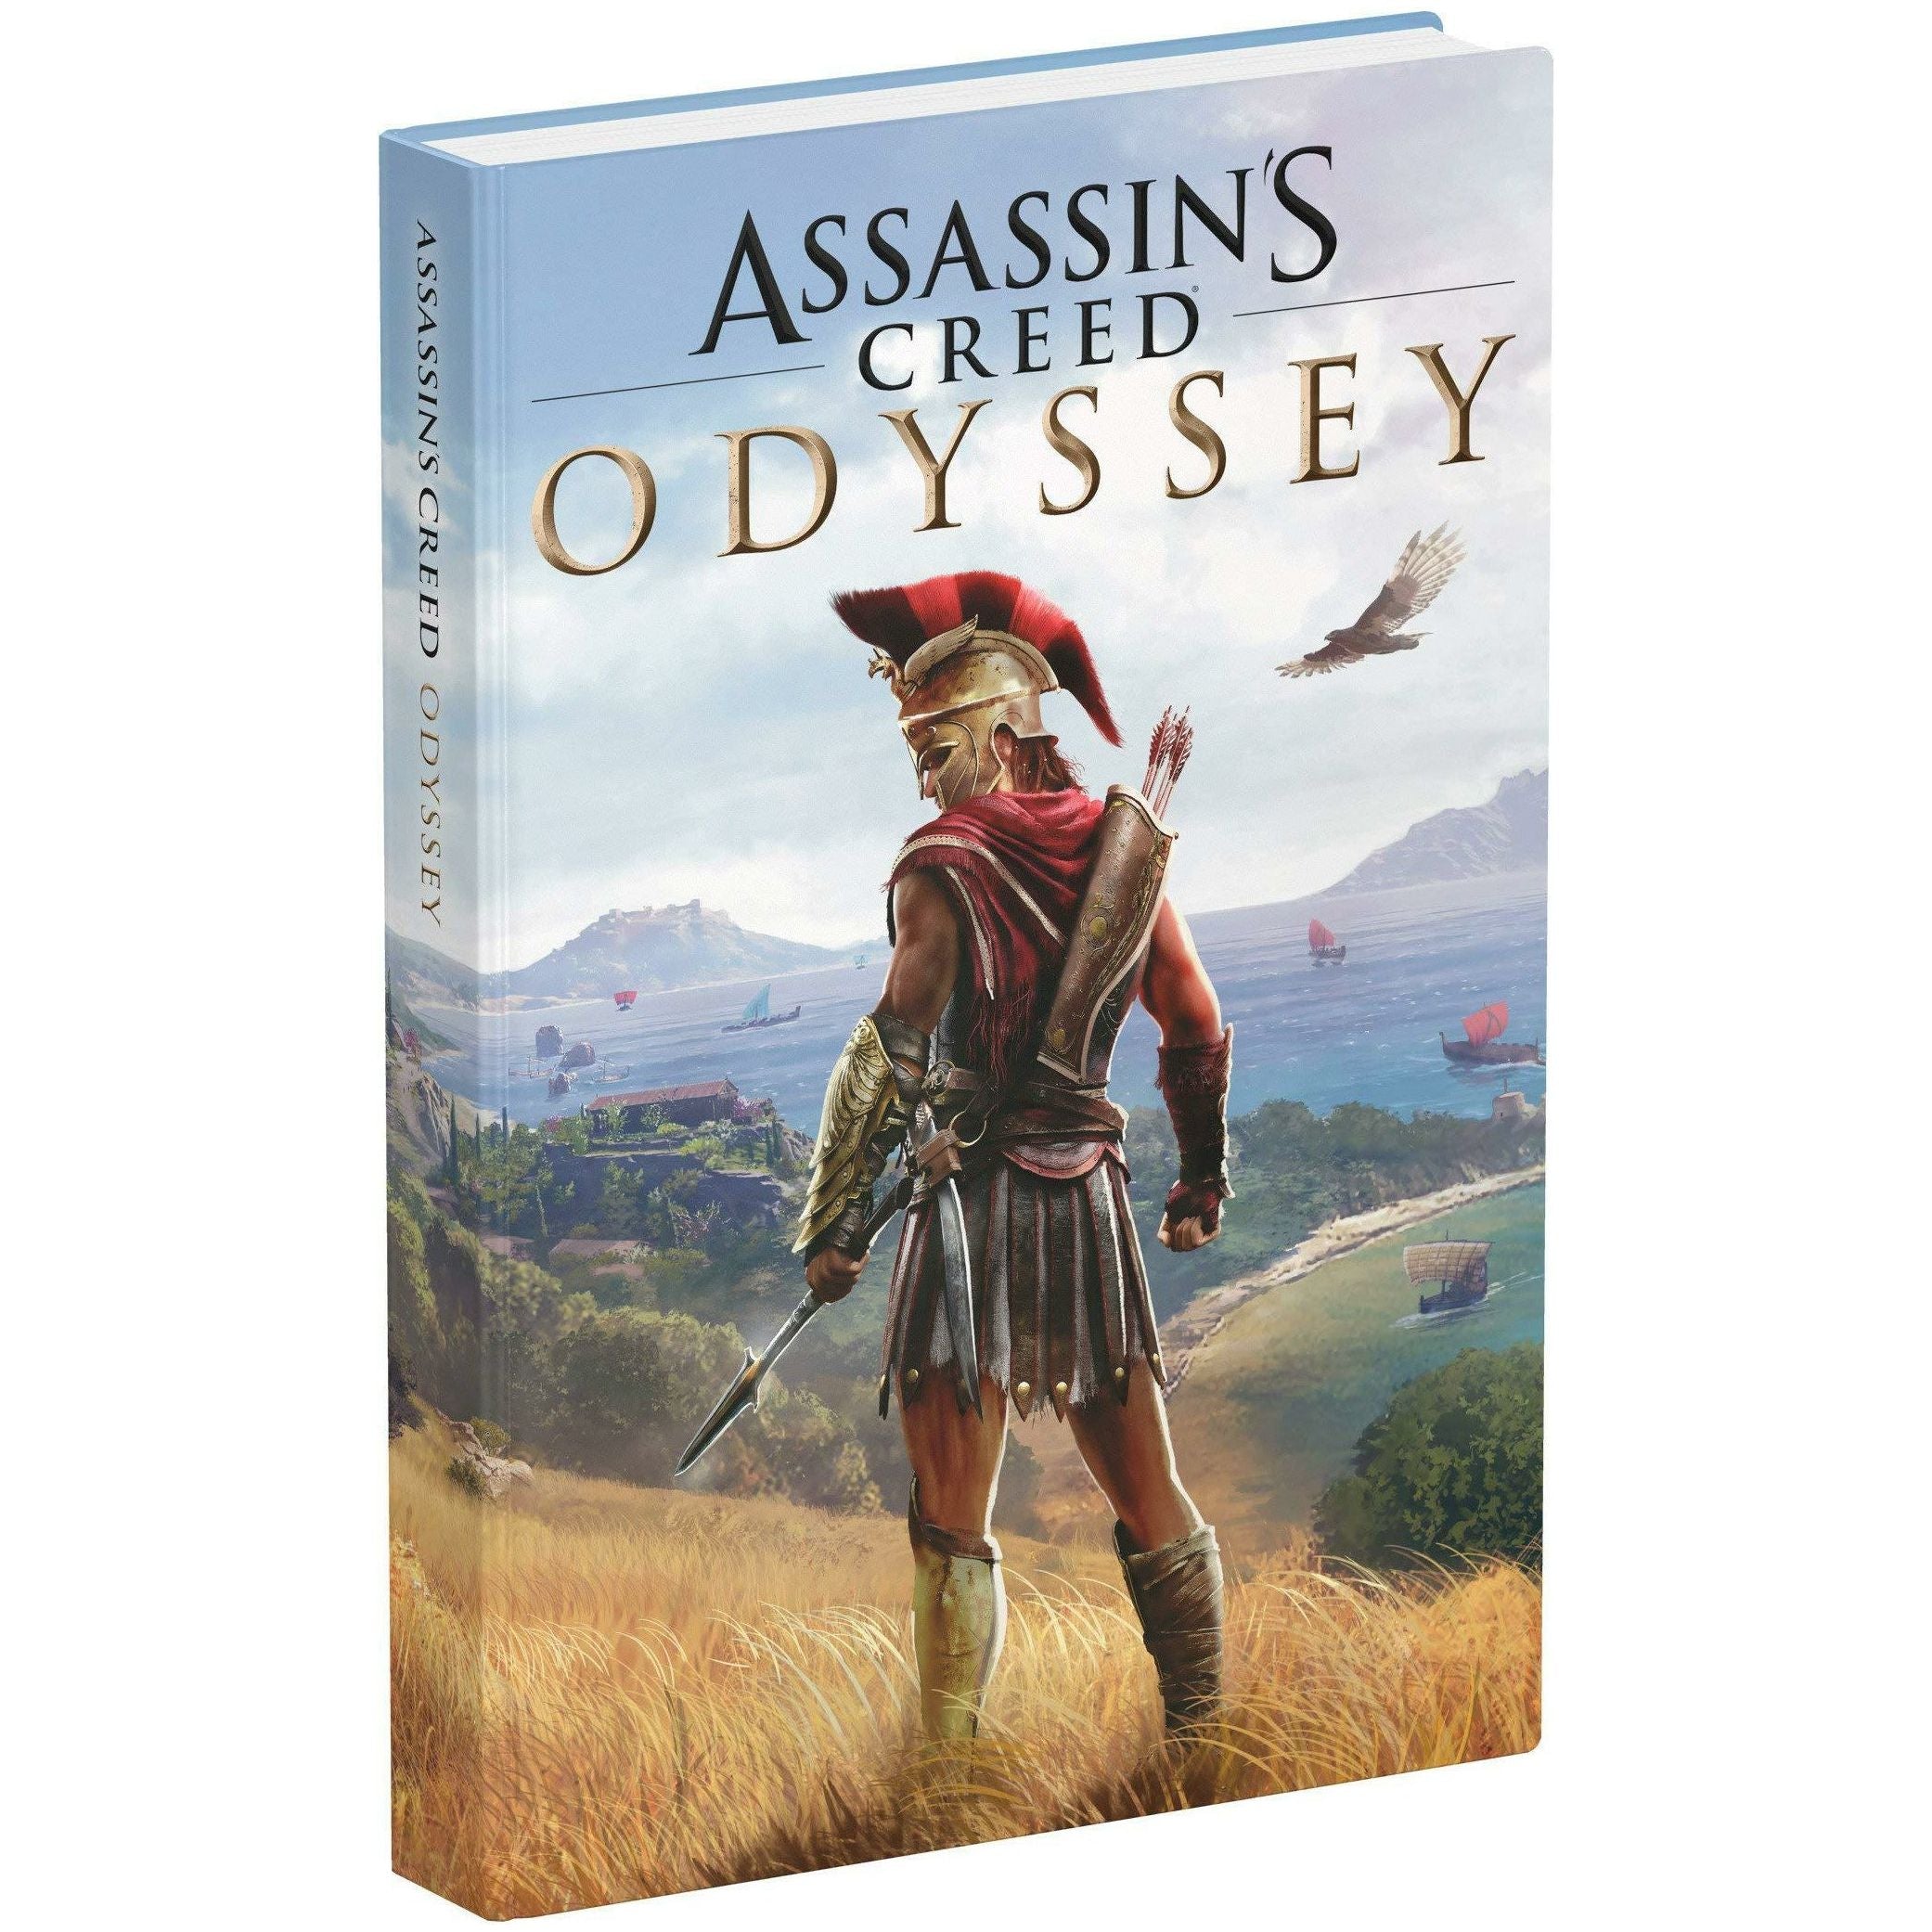 Assassin's Creed Odyssey Official Collector's Edition Guide Hardcover